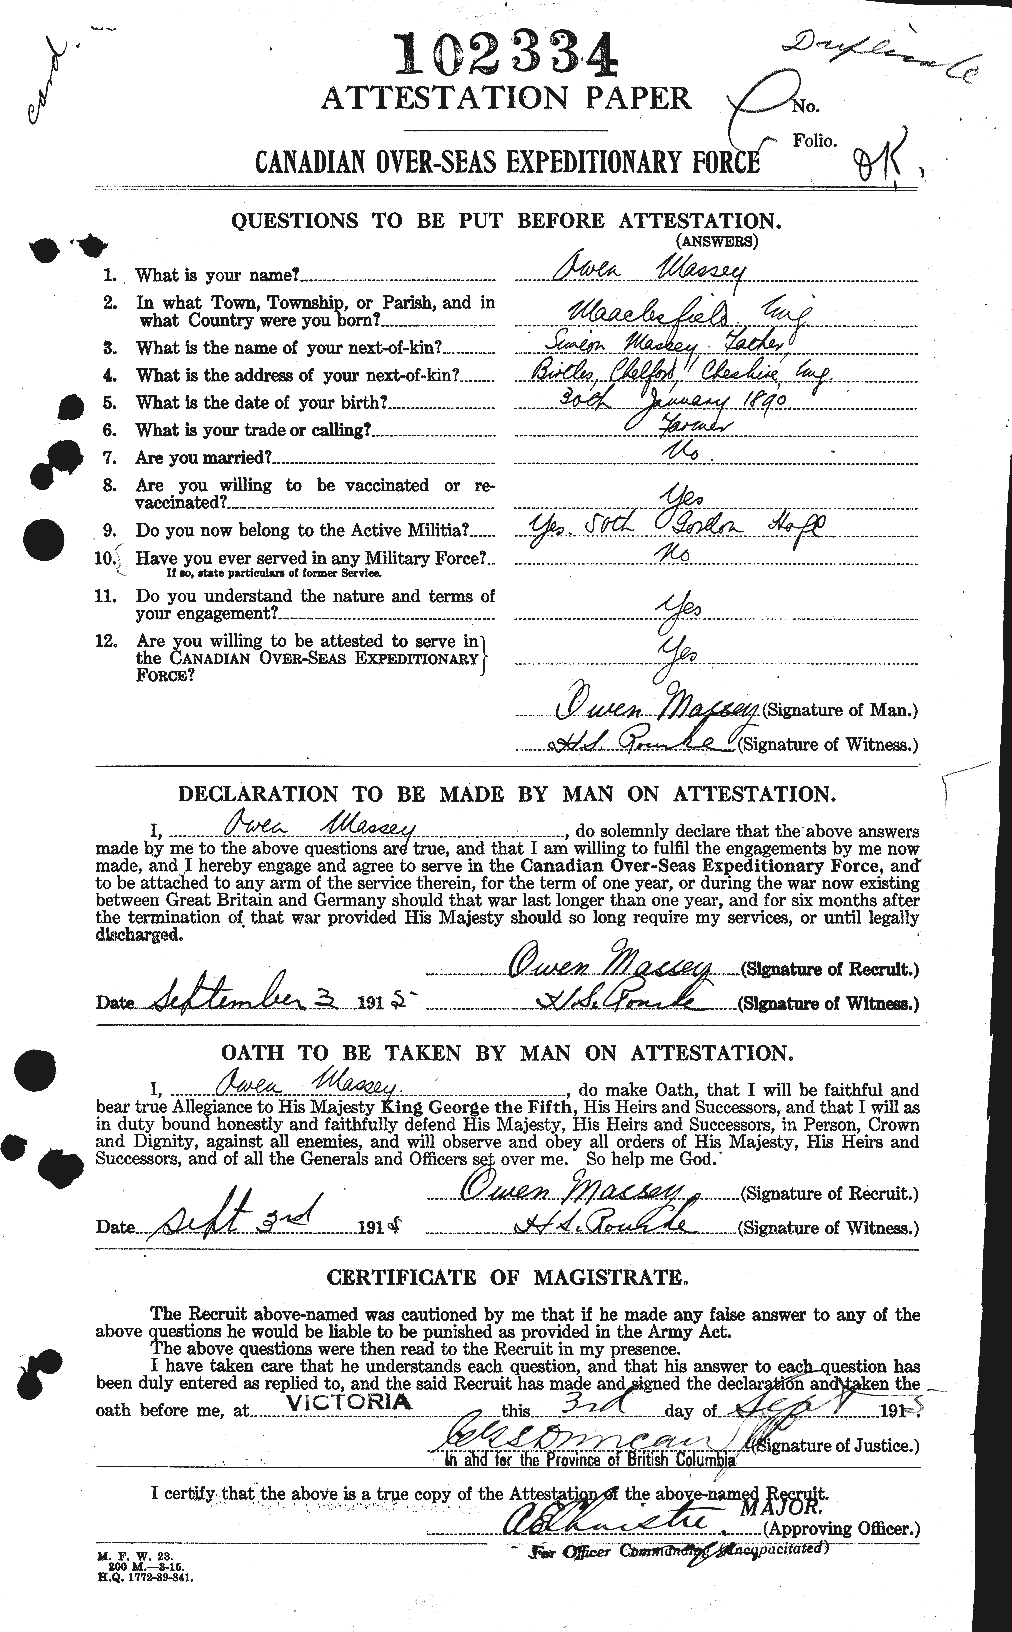 Personnel Records of the First World War - CEF 487092a